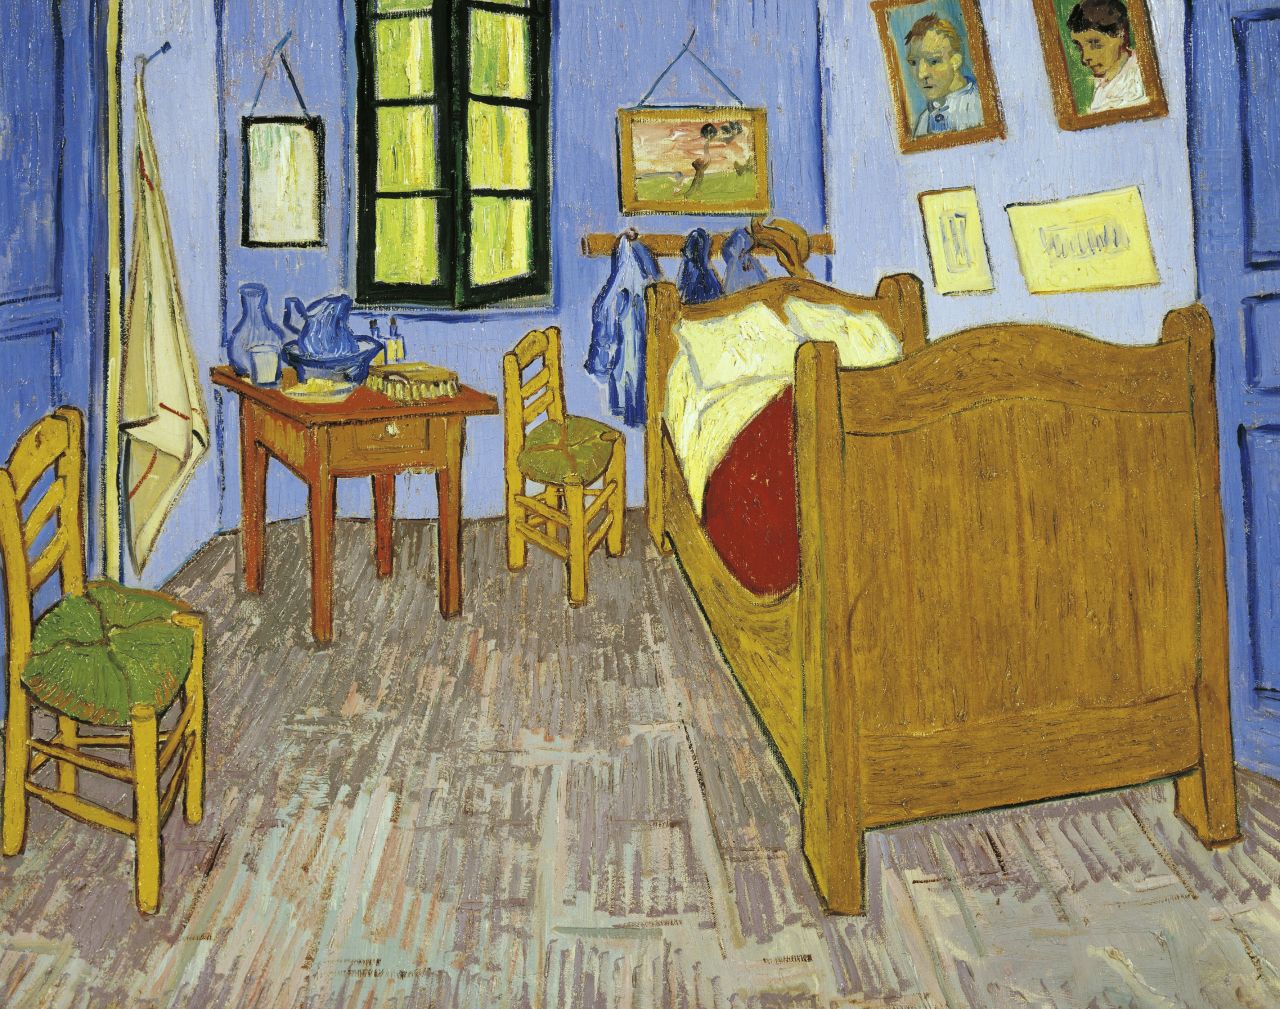 The bedroom mirror where Van Gogh saw himself cut his own ear appears in this 1889 painting.